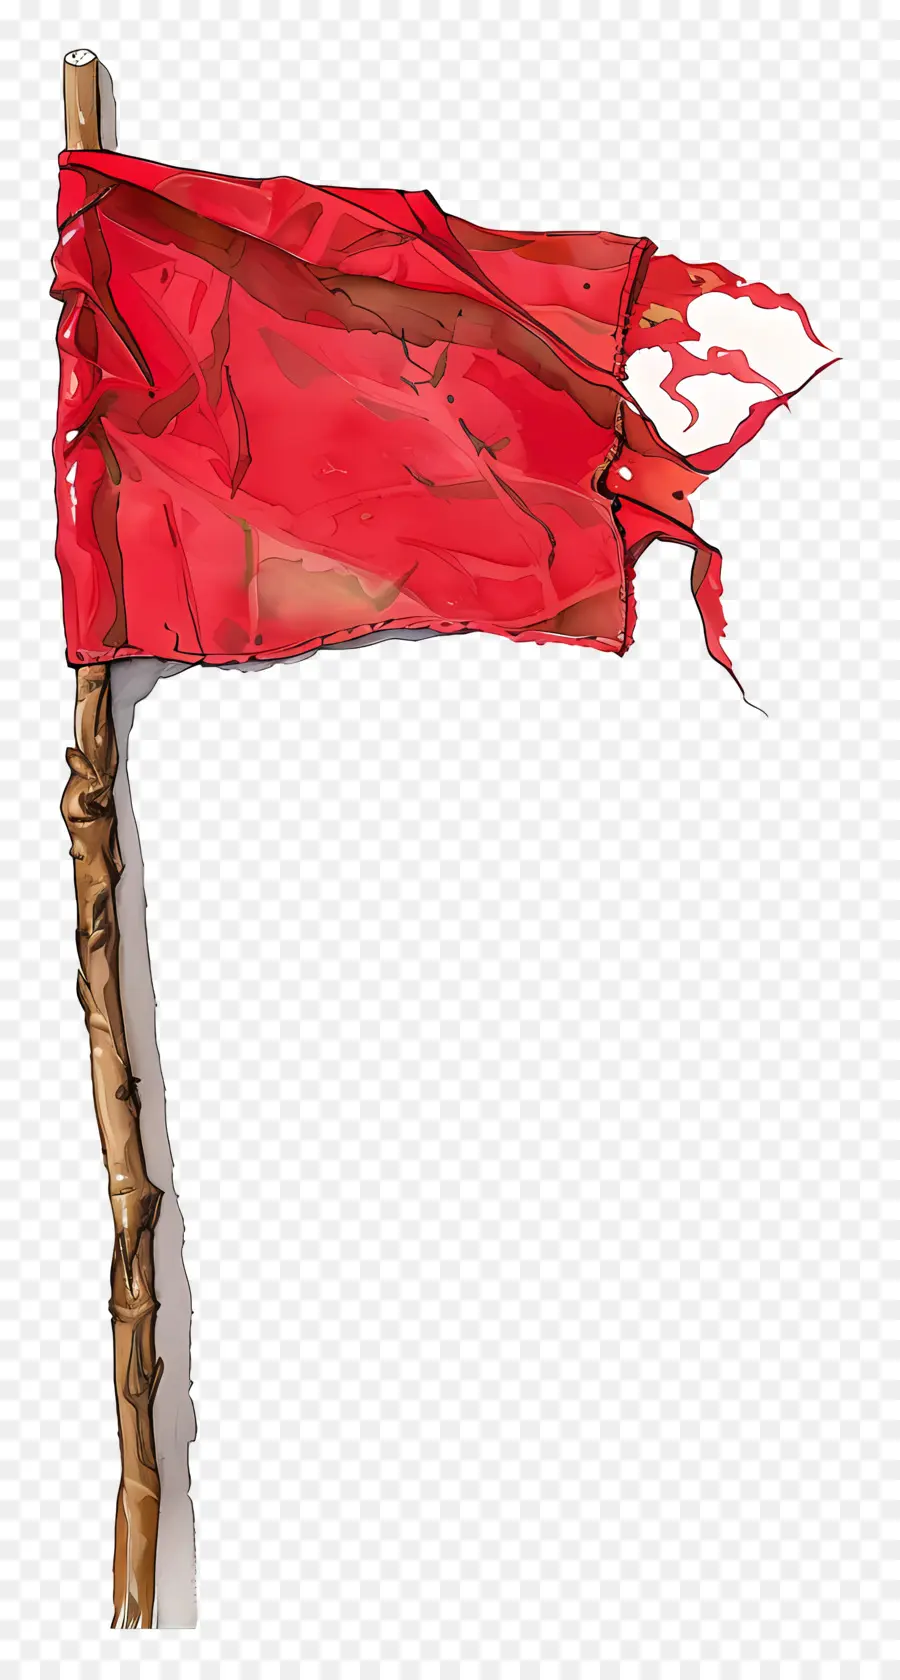 red flag number 3 cloth flapping symbol